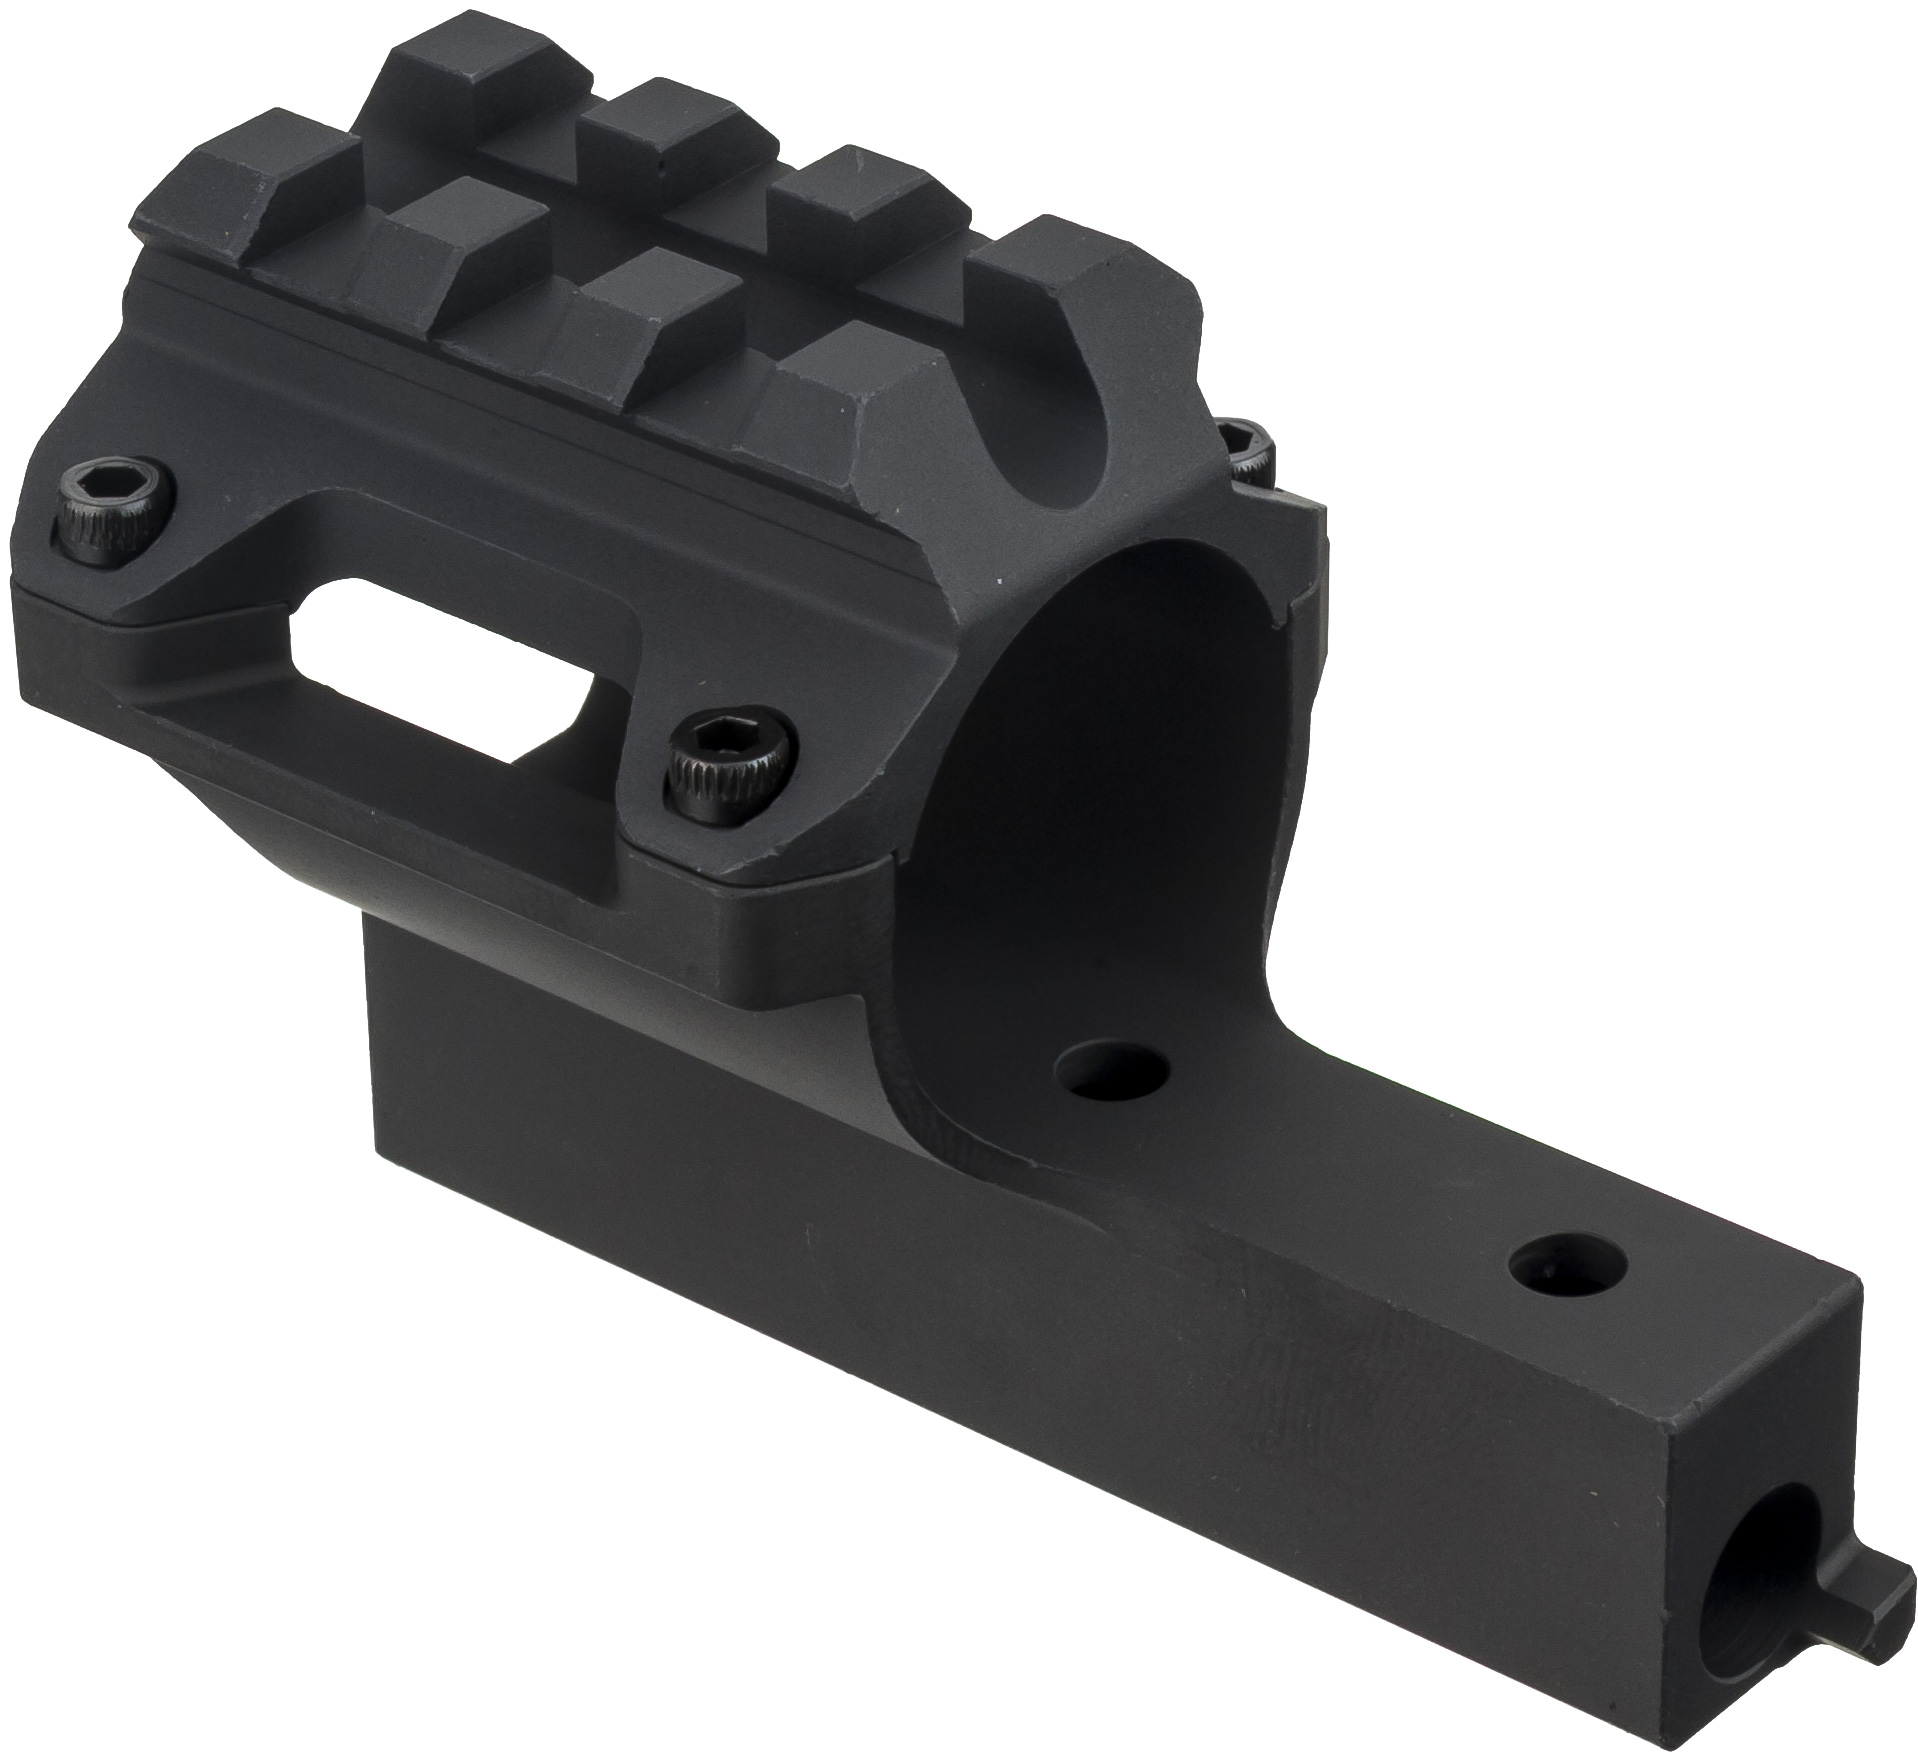 MAGPUL Backpacker Optic MOUNT for X-22 Ruger 10/22 Takedown Stock MAG799-BLK 